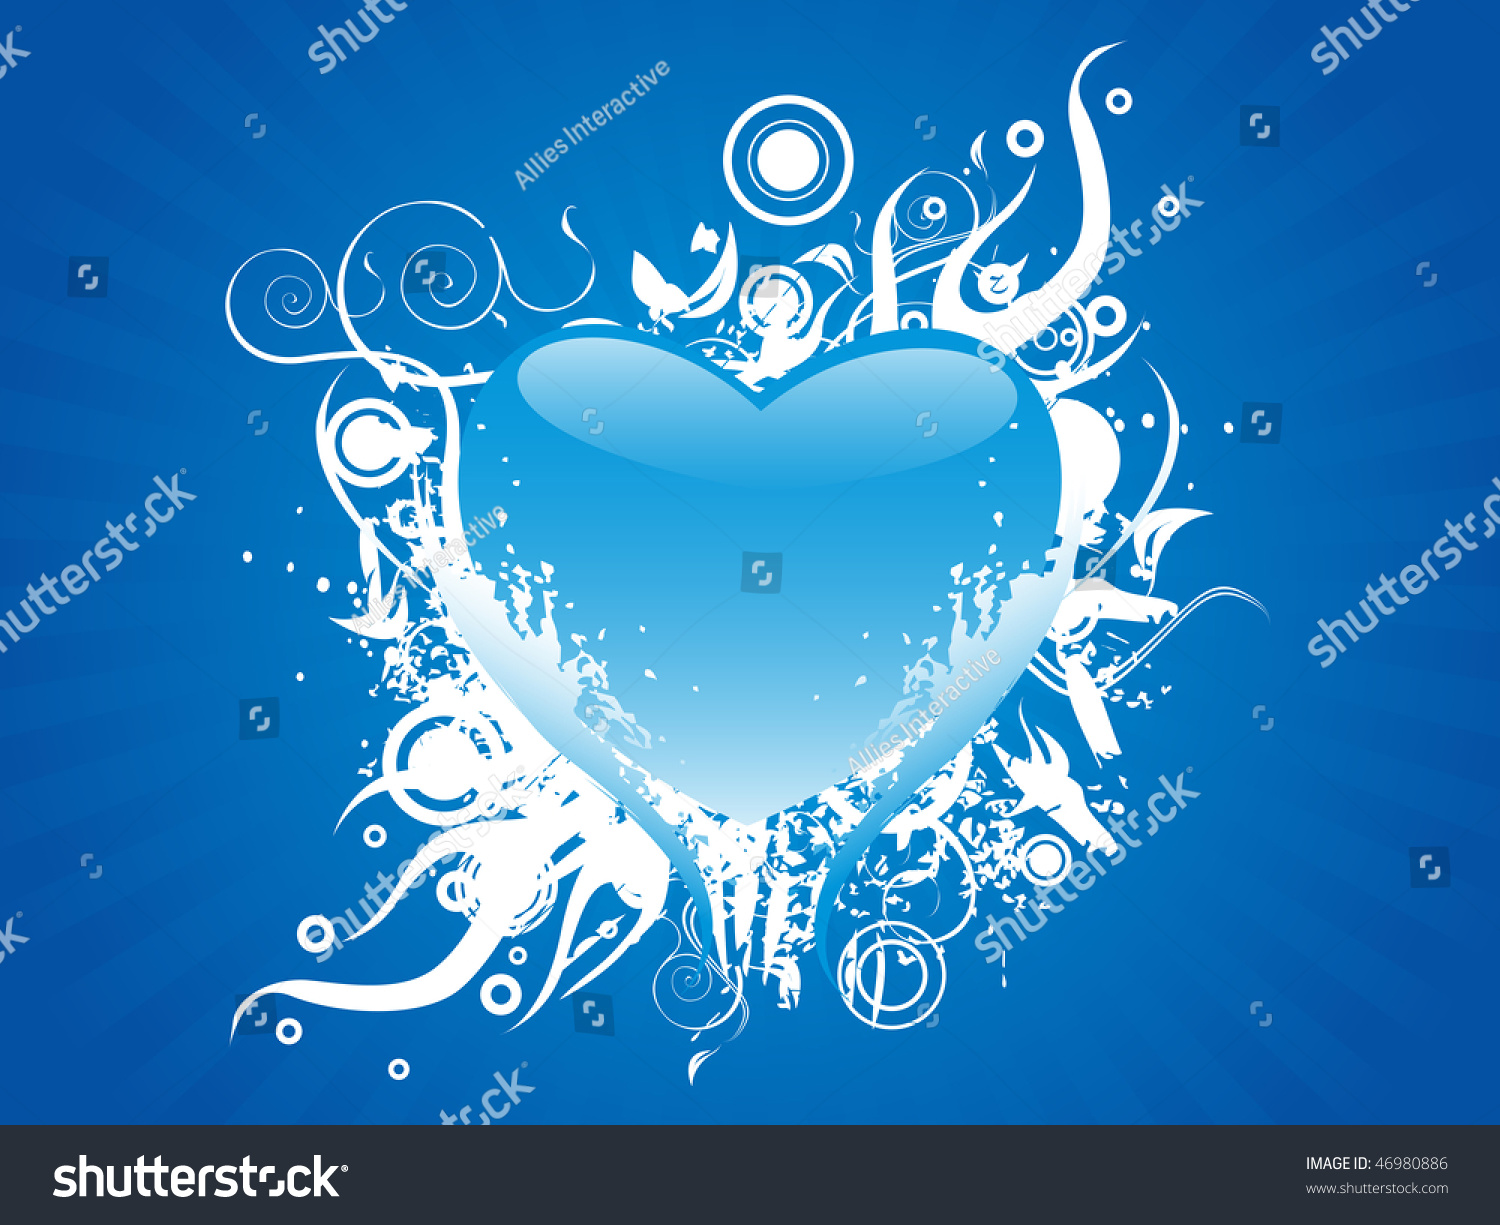 Flaming Heart Isolated On Blue Stock Vector Illustration 46980886 ...